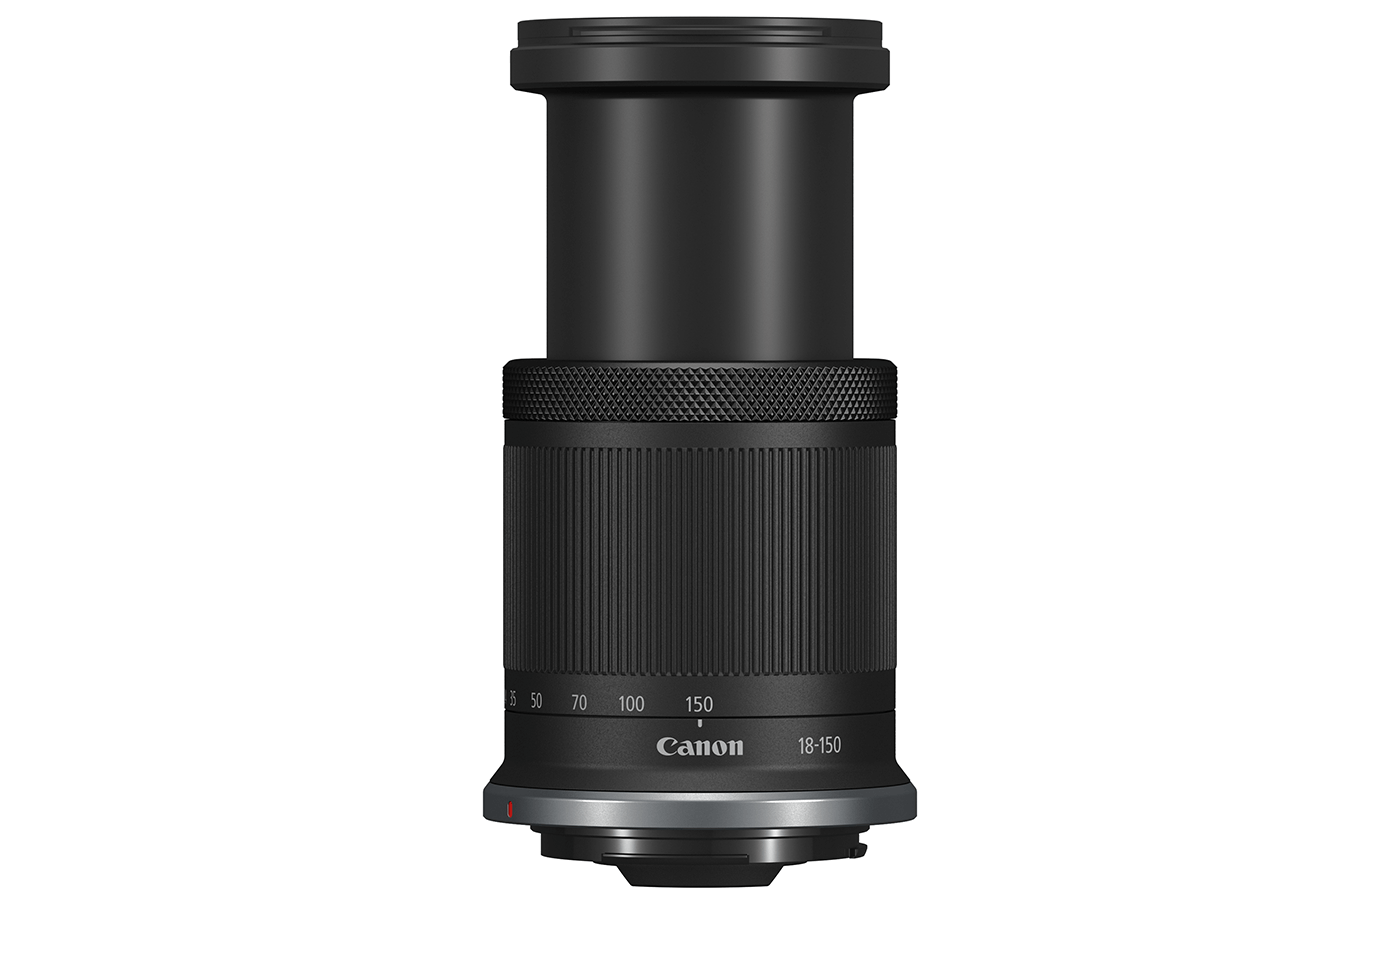 Side profile image of the RF-S 18-150mm f/3.5-6.3 IS STM standard zoom lens extended